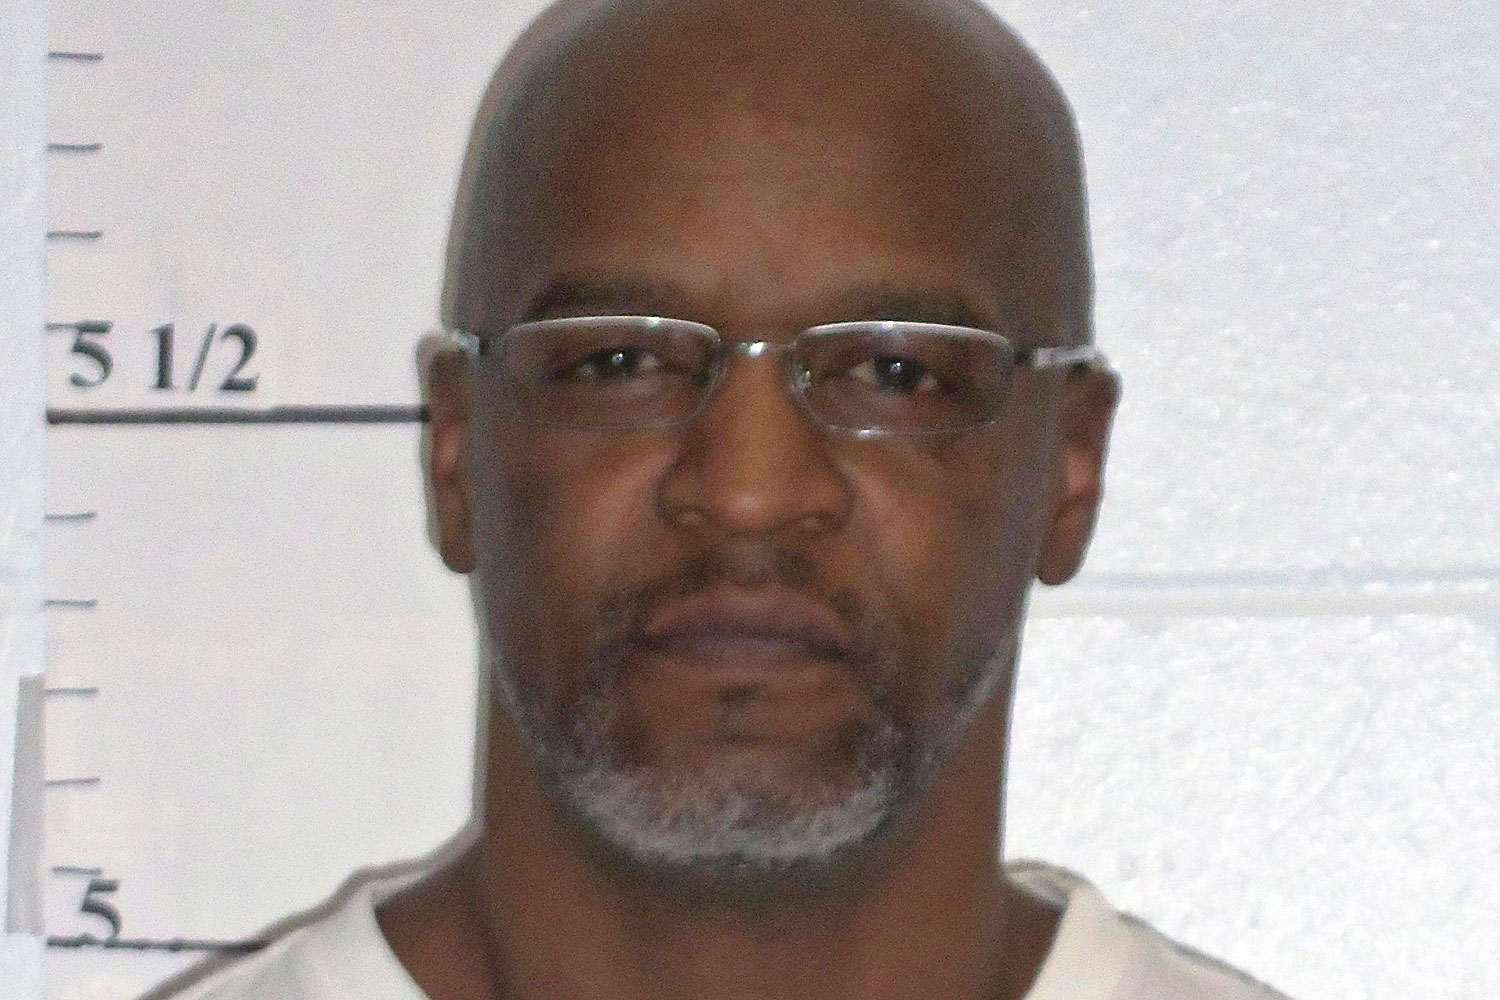 Convicted killer Michael Taylor is shown in this Missouri Department of Corrections photo